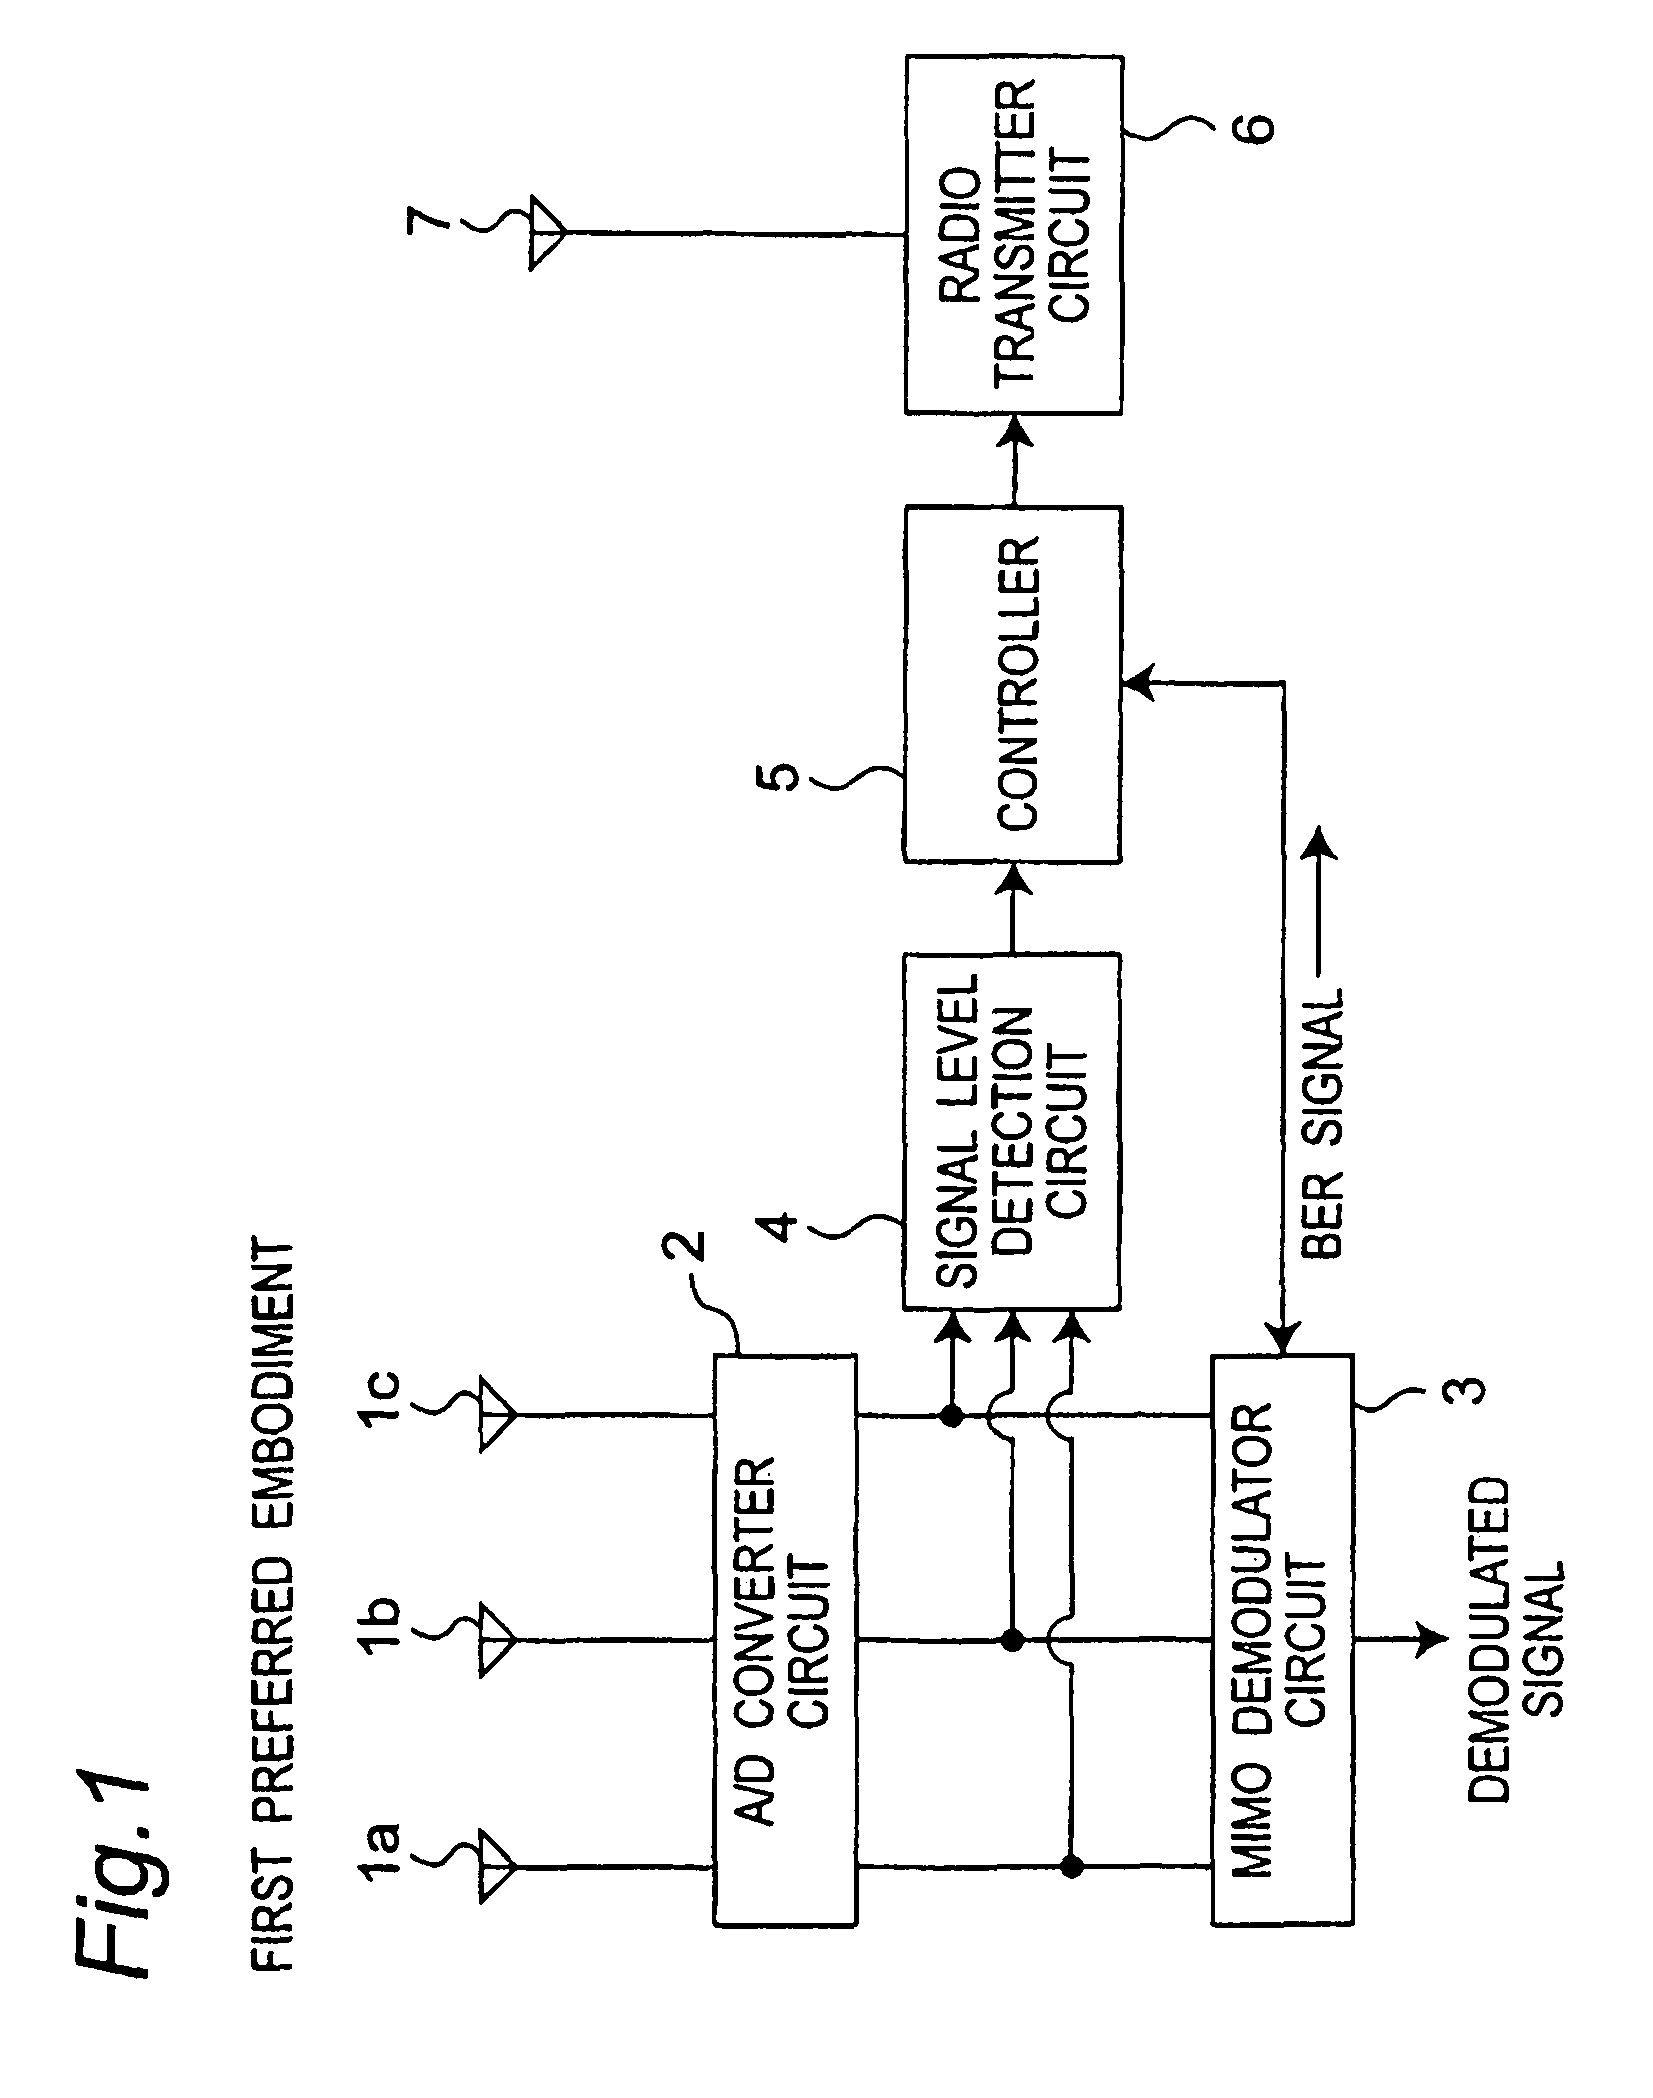 MIMO antenna apparatus controlling number of streams and modulation and demodulation method